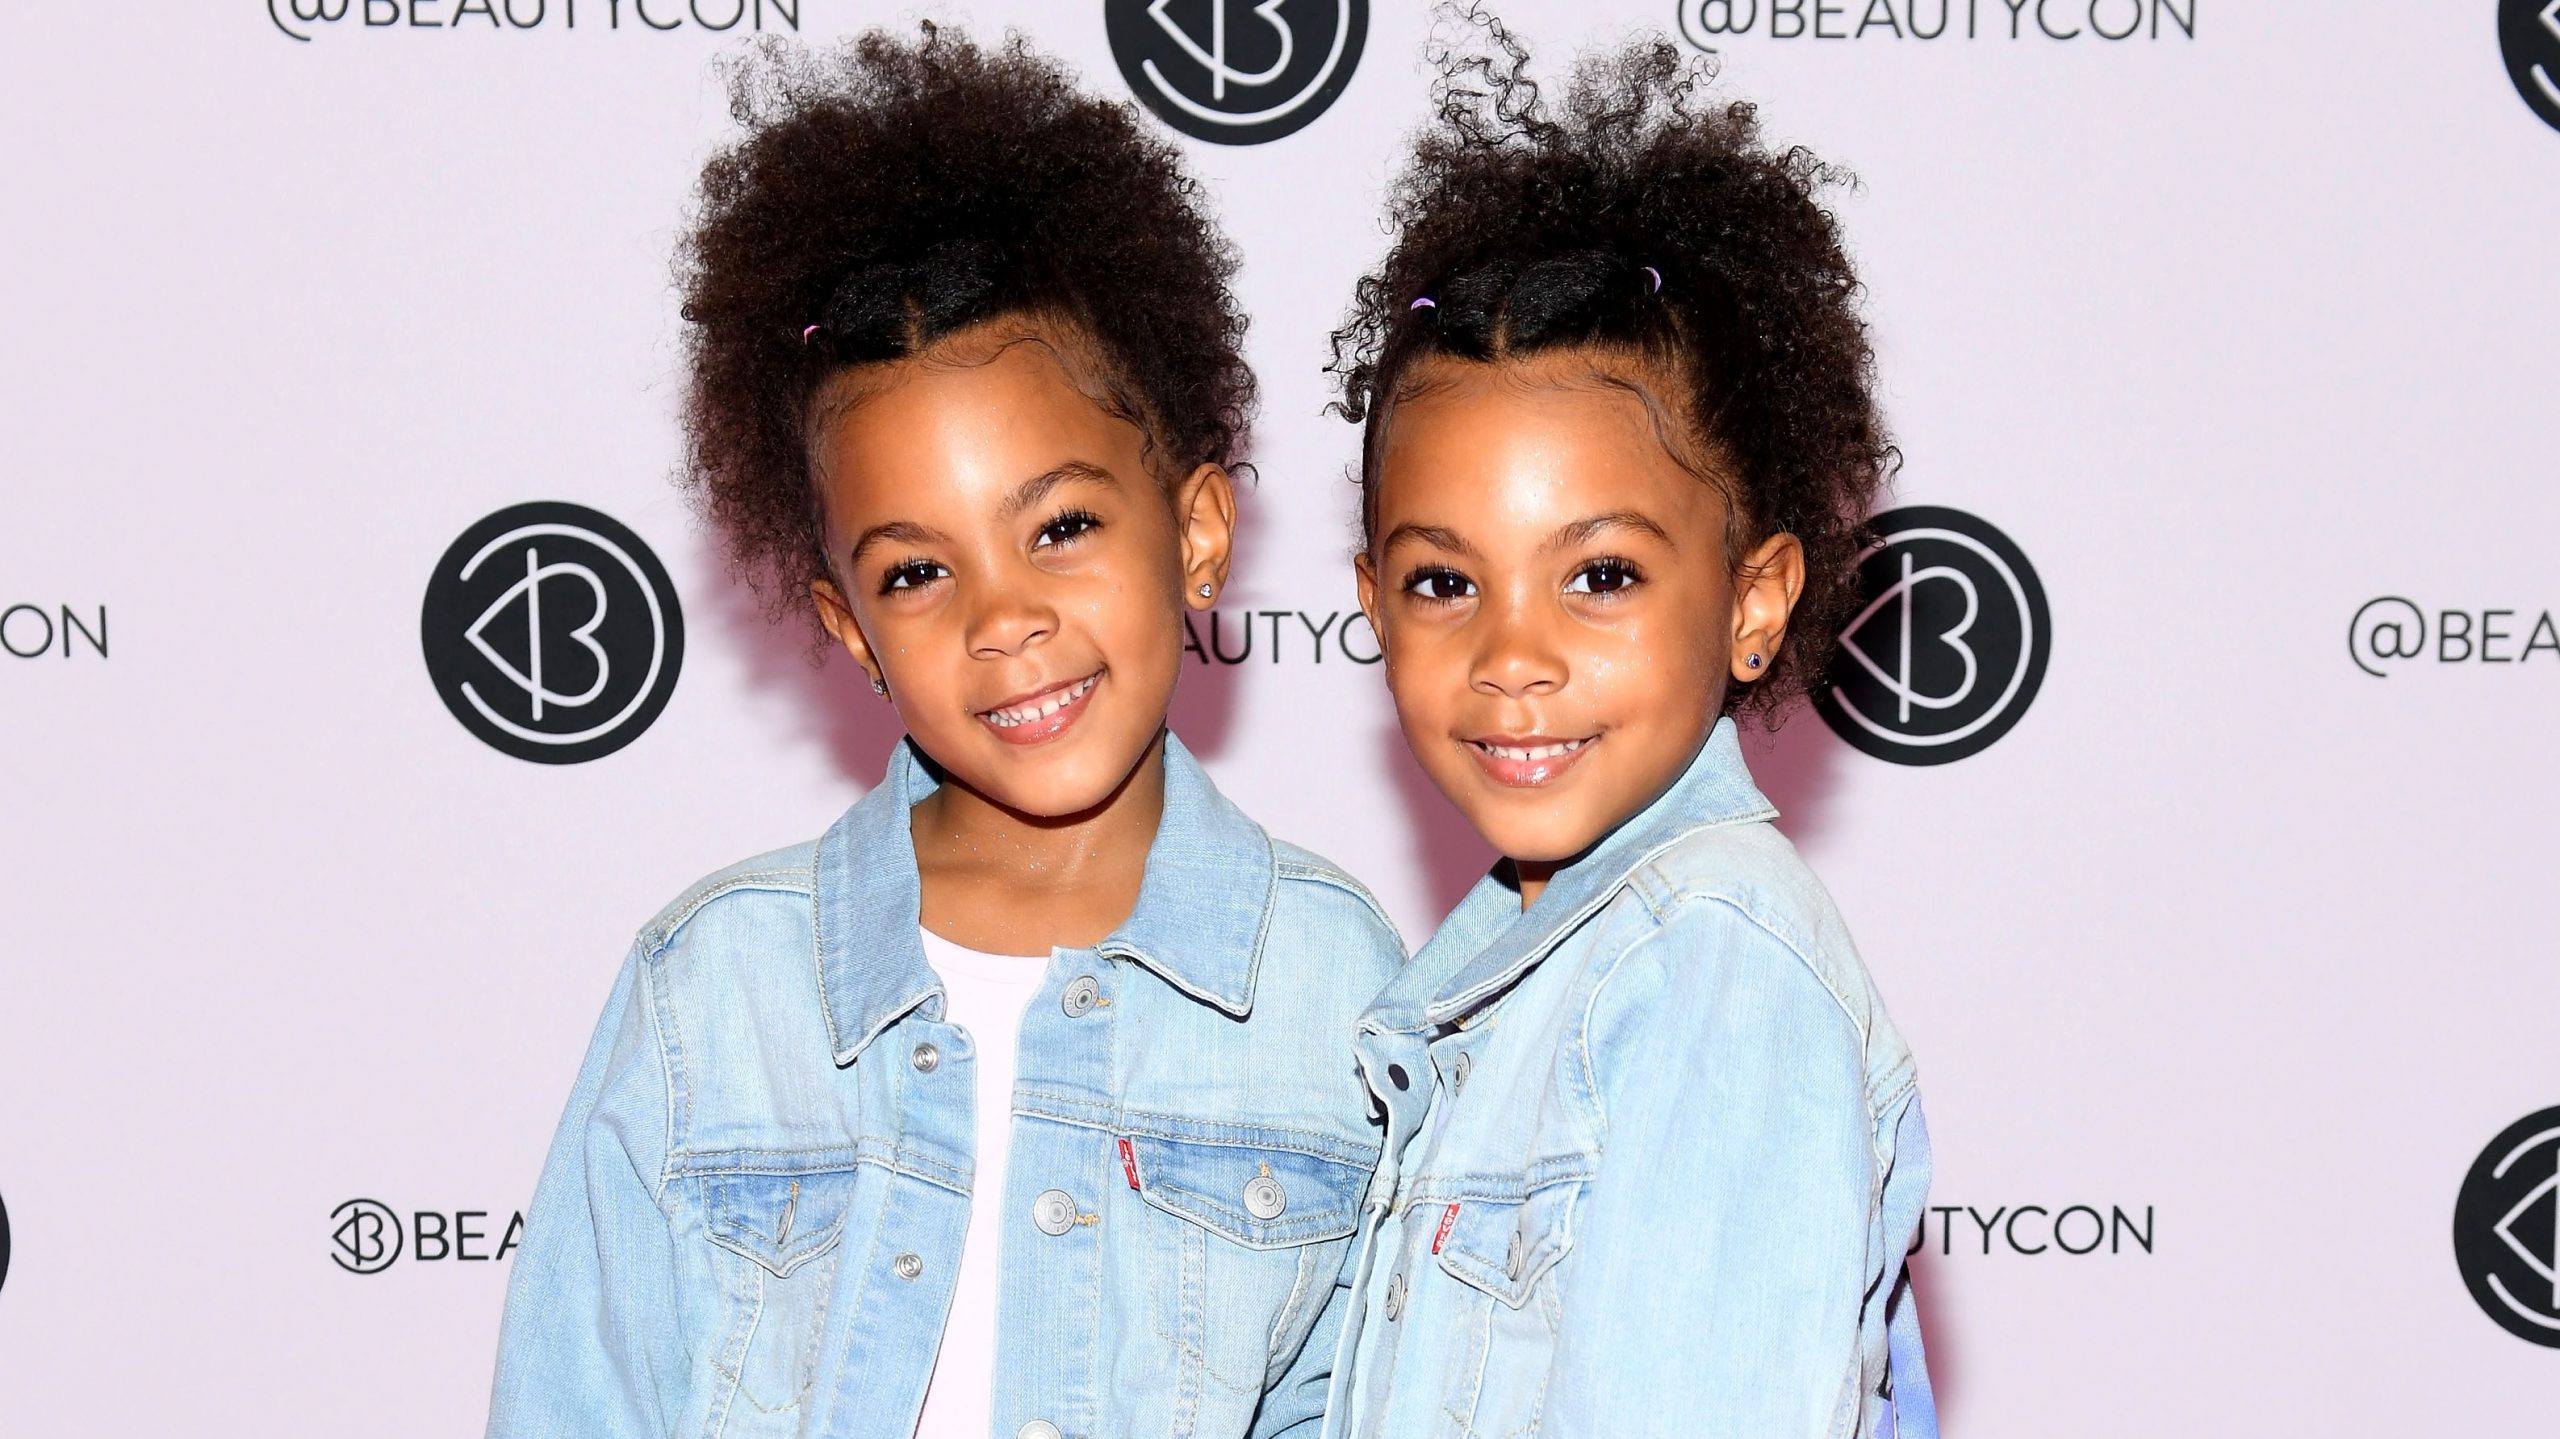 Double The Cuteness: The McClure Twins’ Funniest YouTube Moments